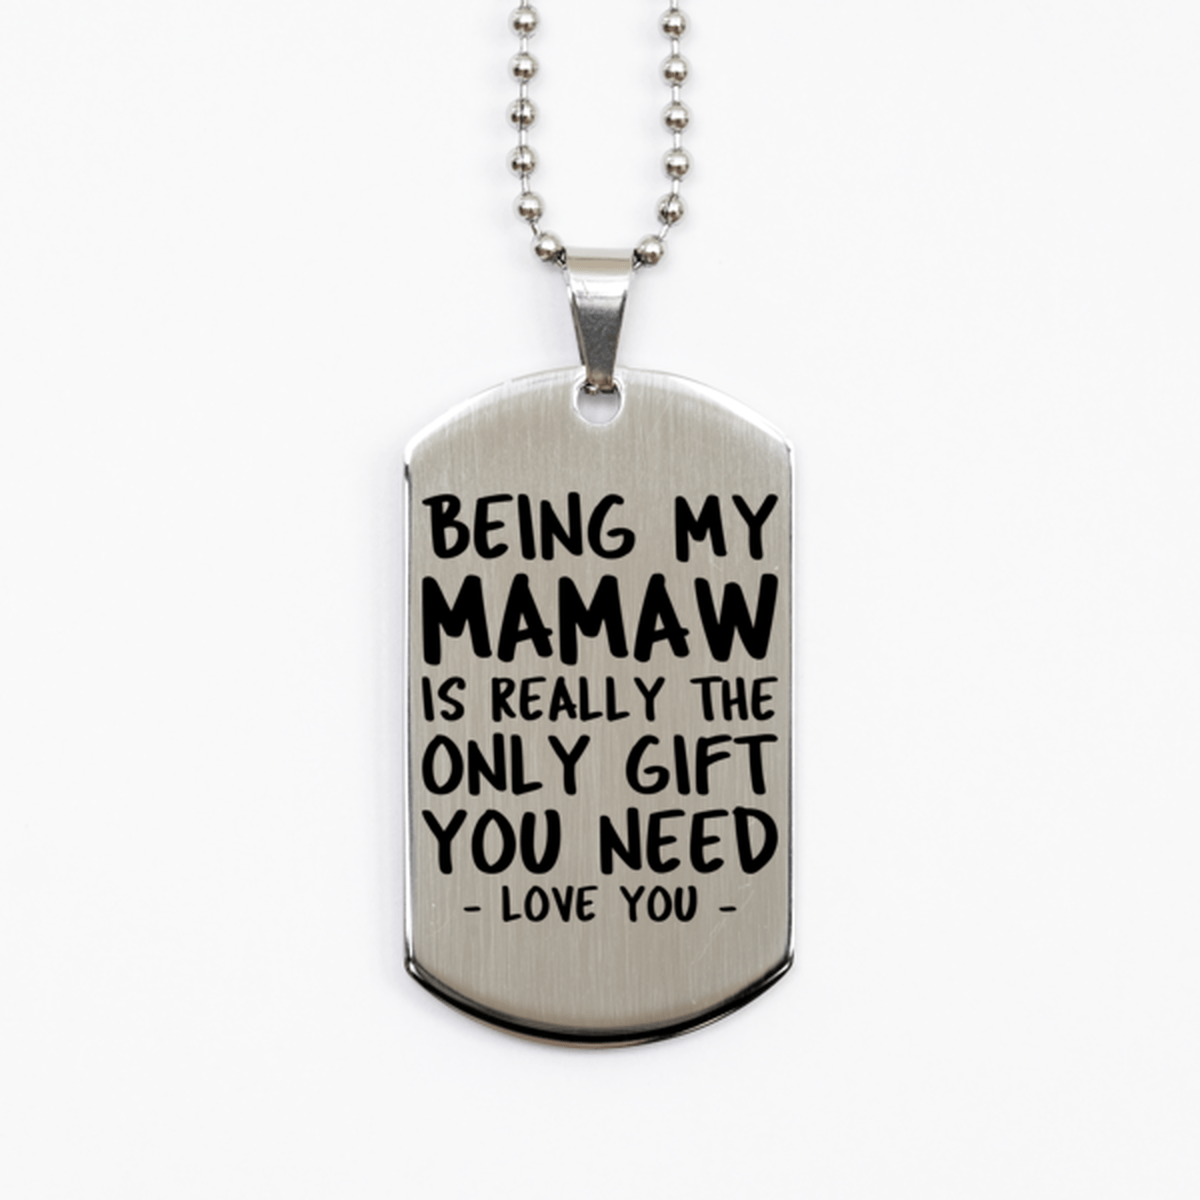 Funny Mamaw Silver Dog Tag Necklace, Being My Mamaw Is Really the Only Gift You Need, Best Birthday Gifts for Mamaw